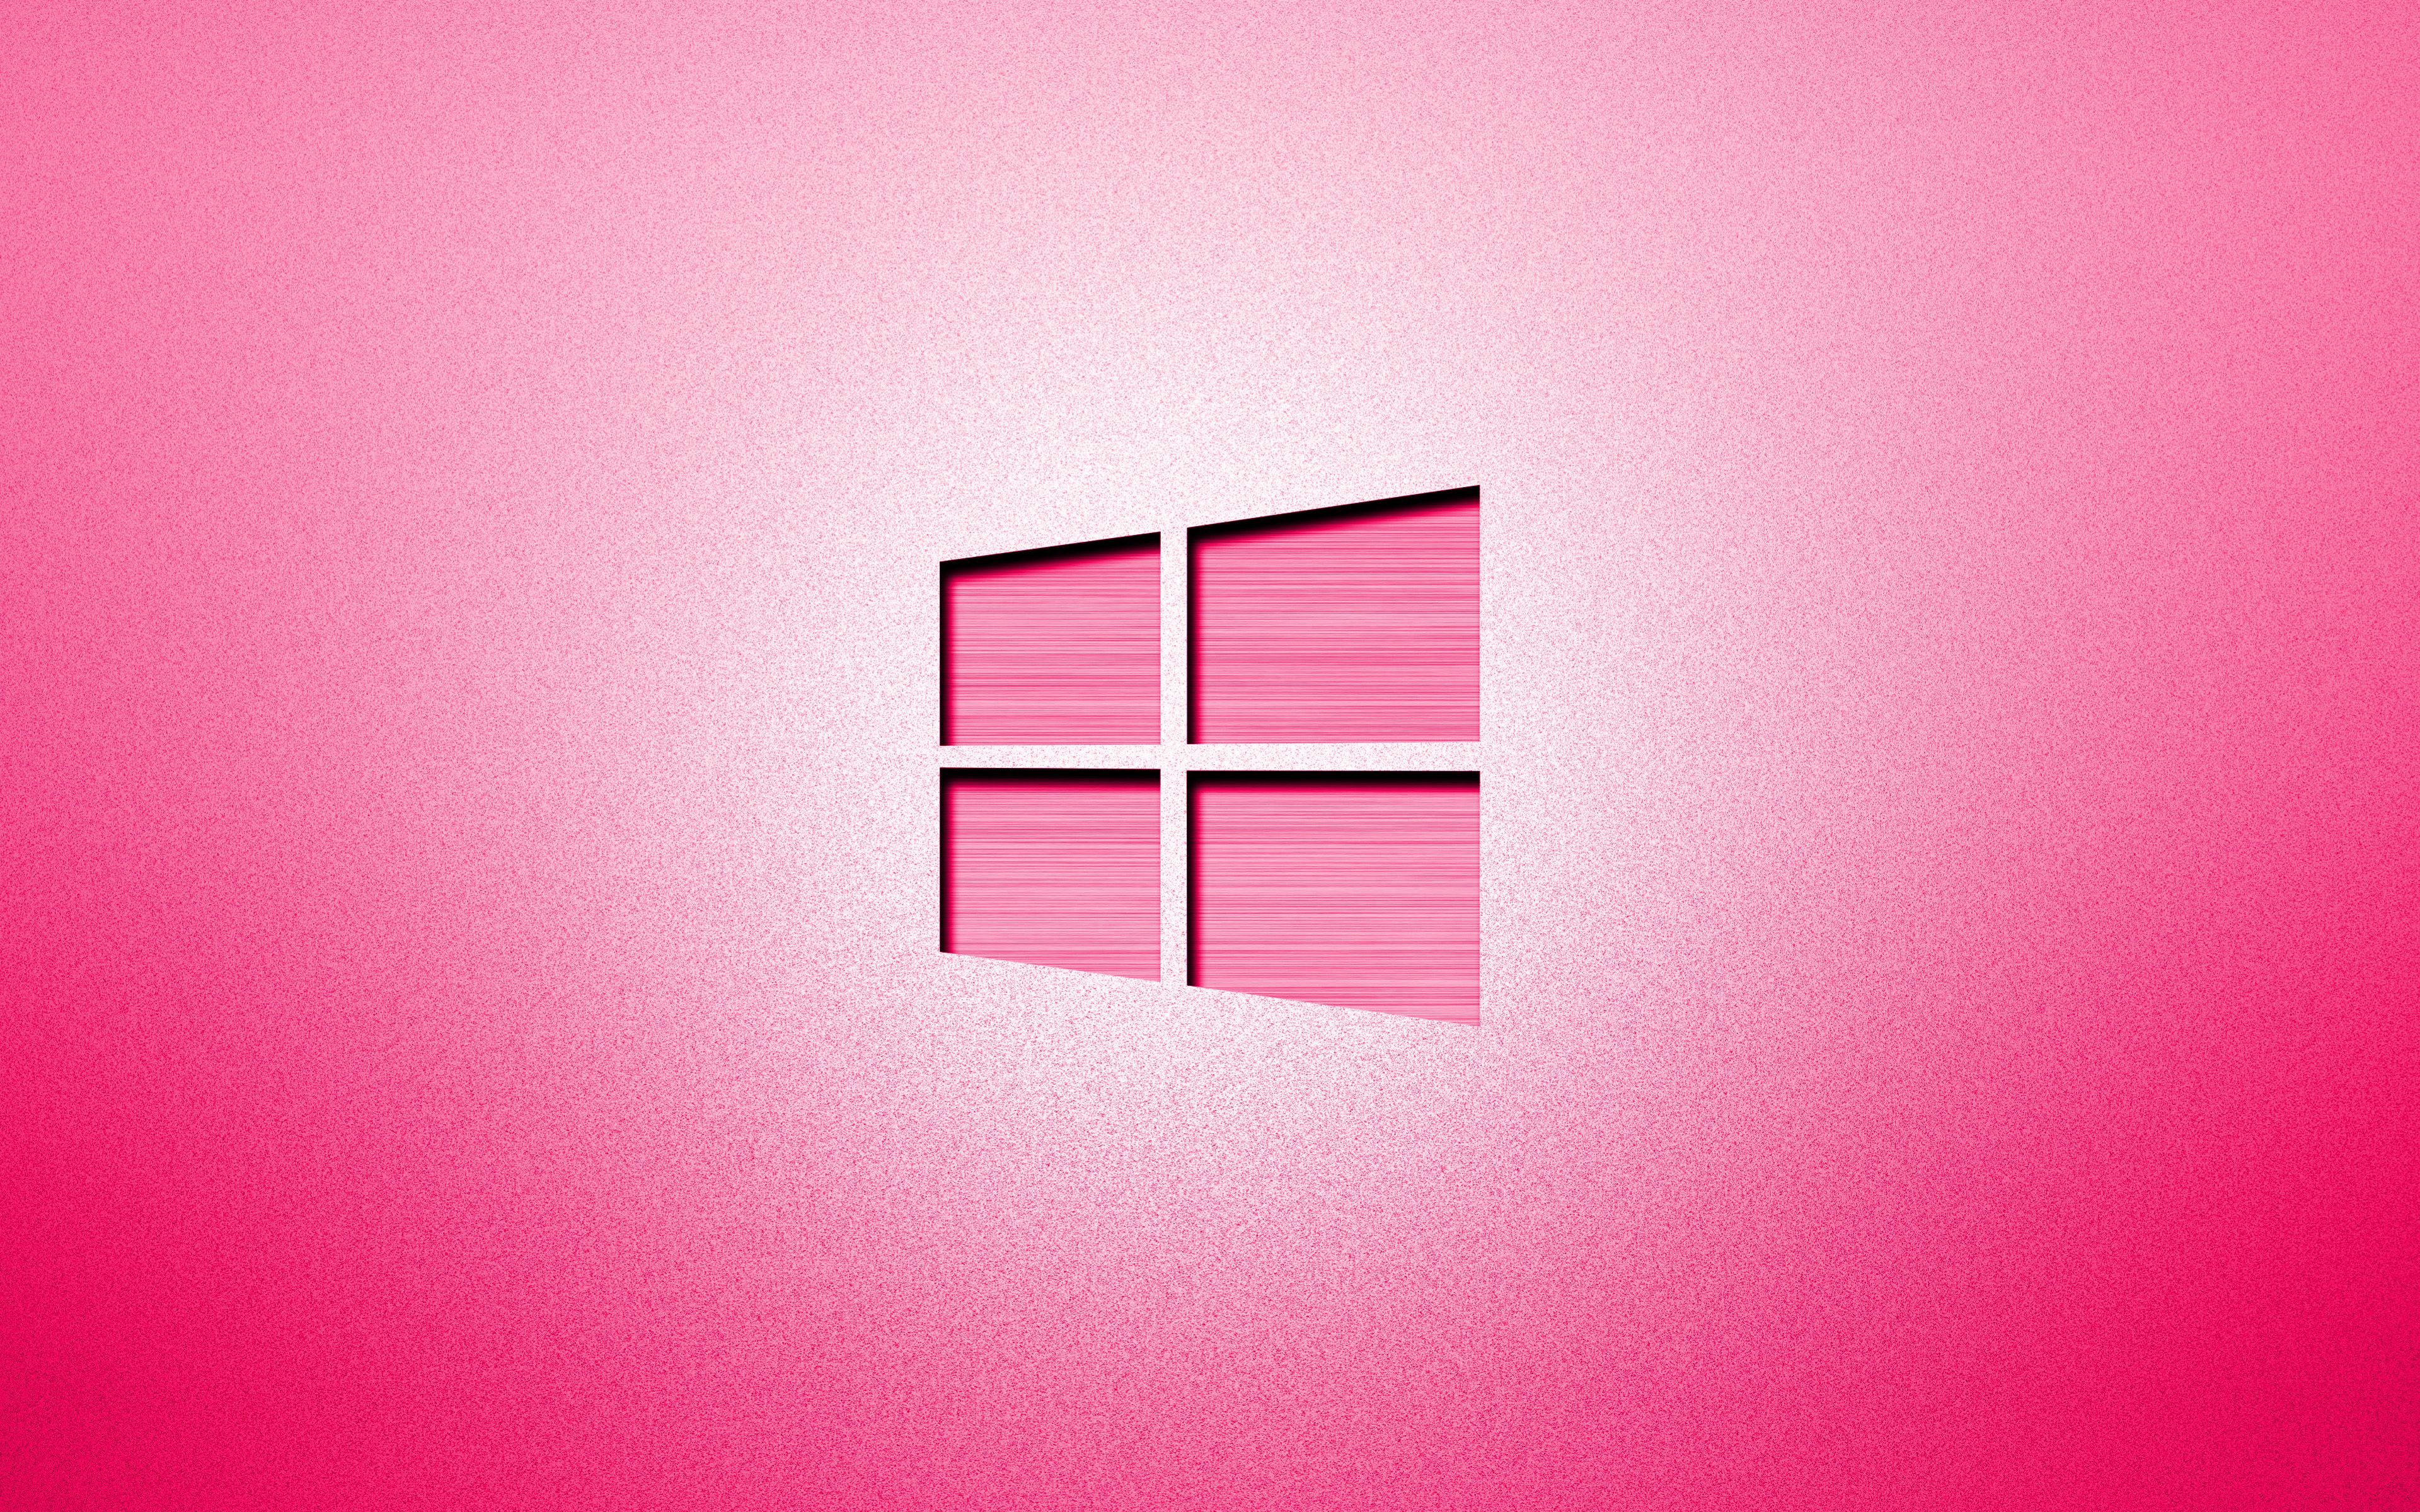 Download wallpaper 4k, Windows 10 pink logo, creative, pink background, minimalism, operating systems, Windows 10 logo, artwork, Windows 10 for desktop with resolution 3840x2400. High Quality HD picture wallpaper